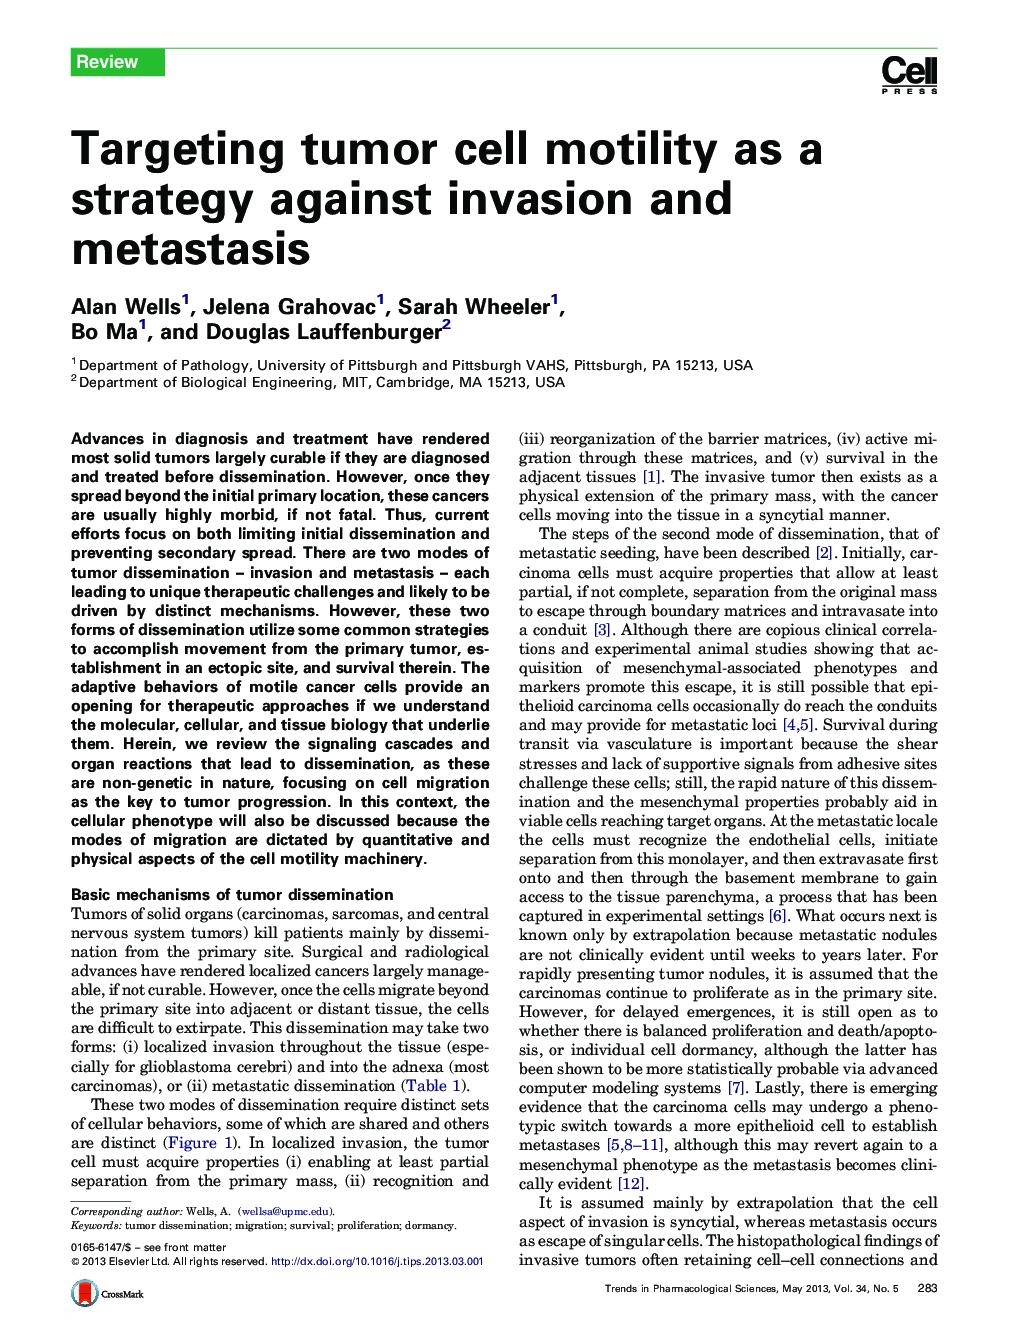 Targeting tumor cell motility as a strategy against invasion and metastasis